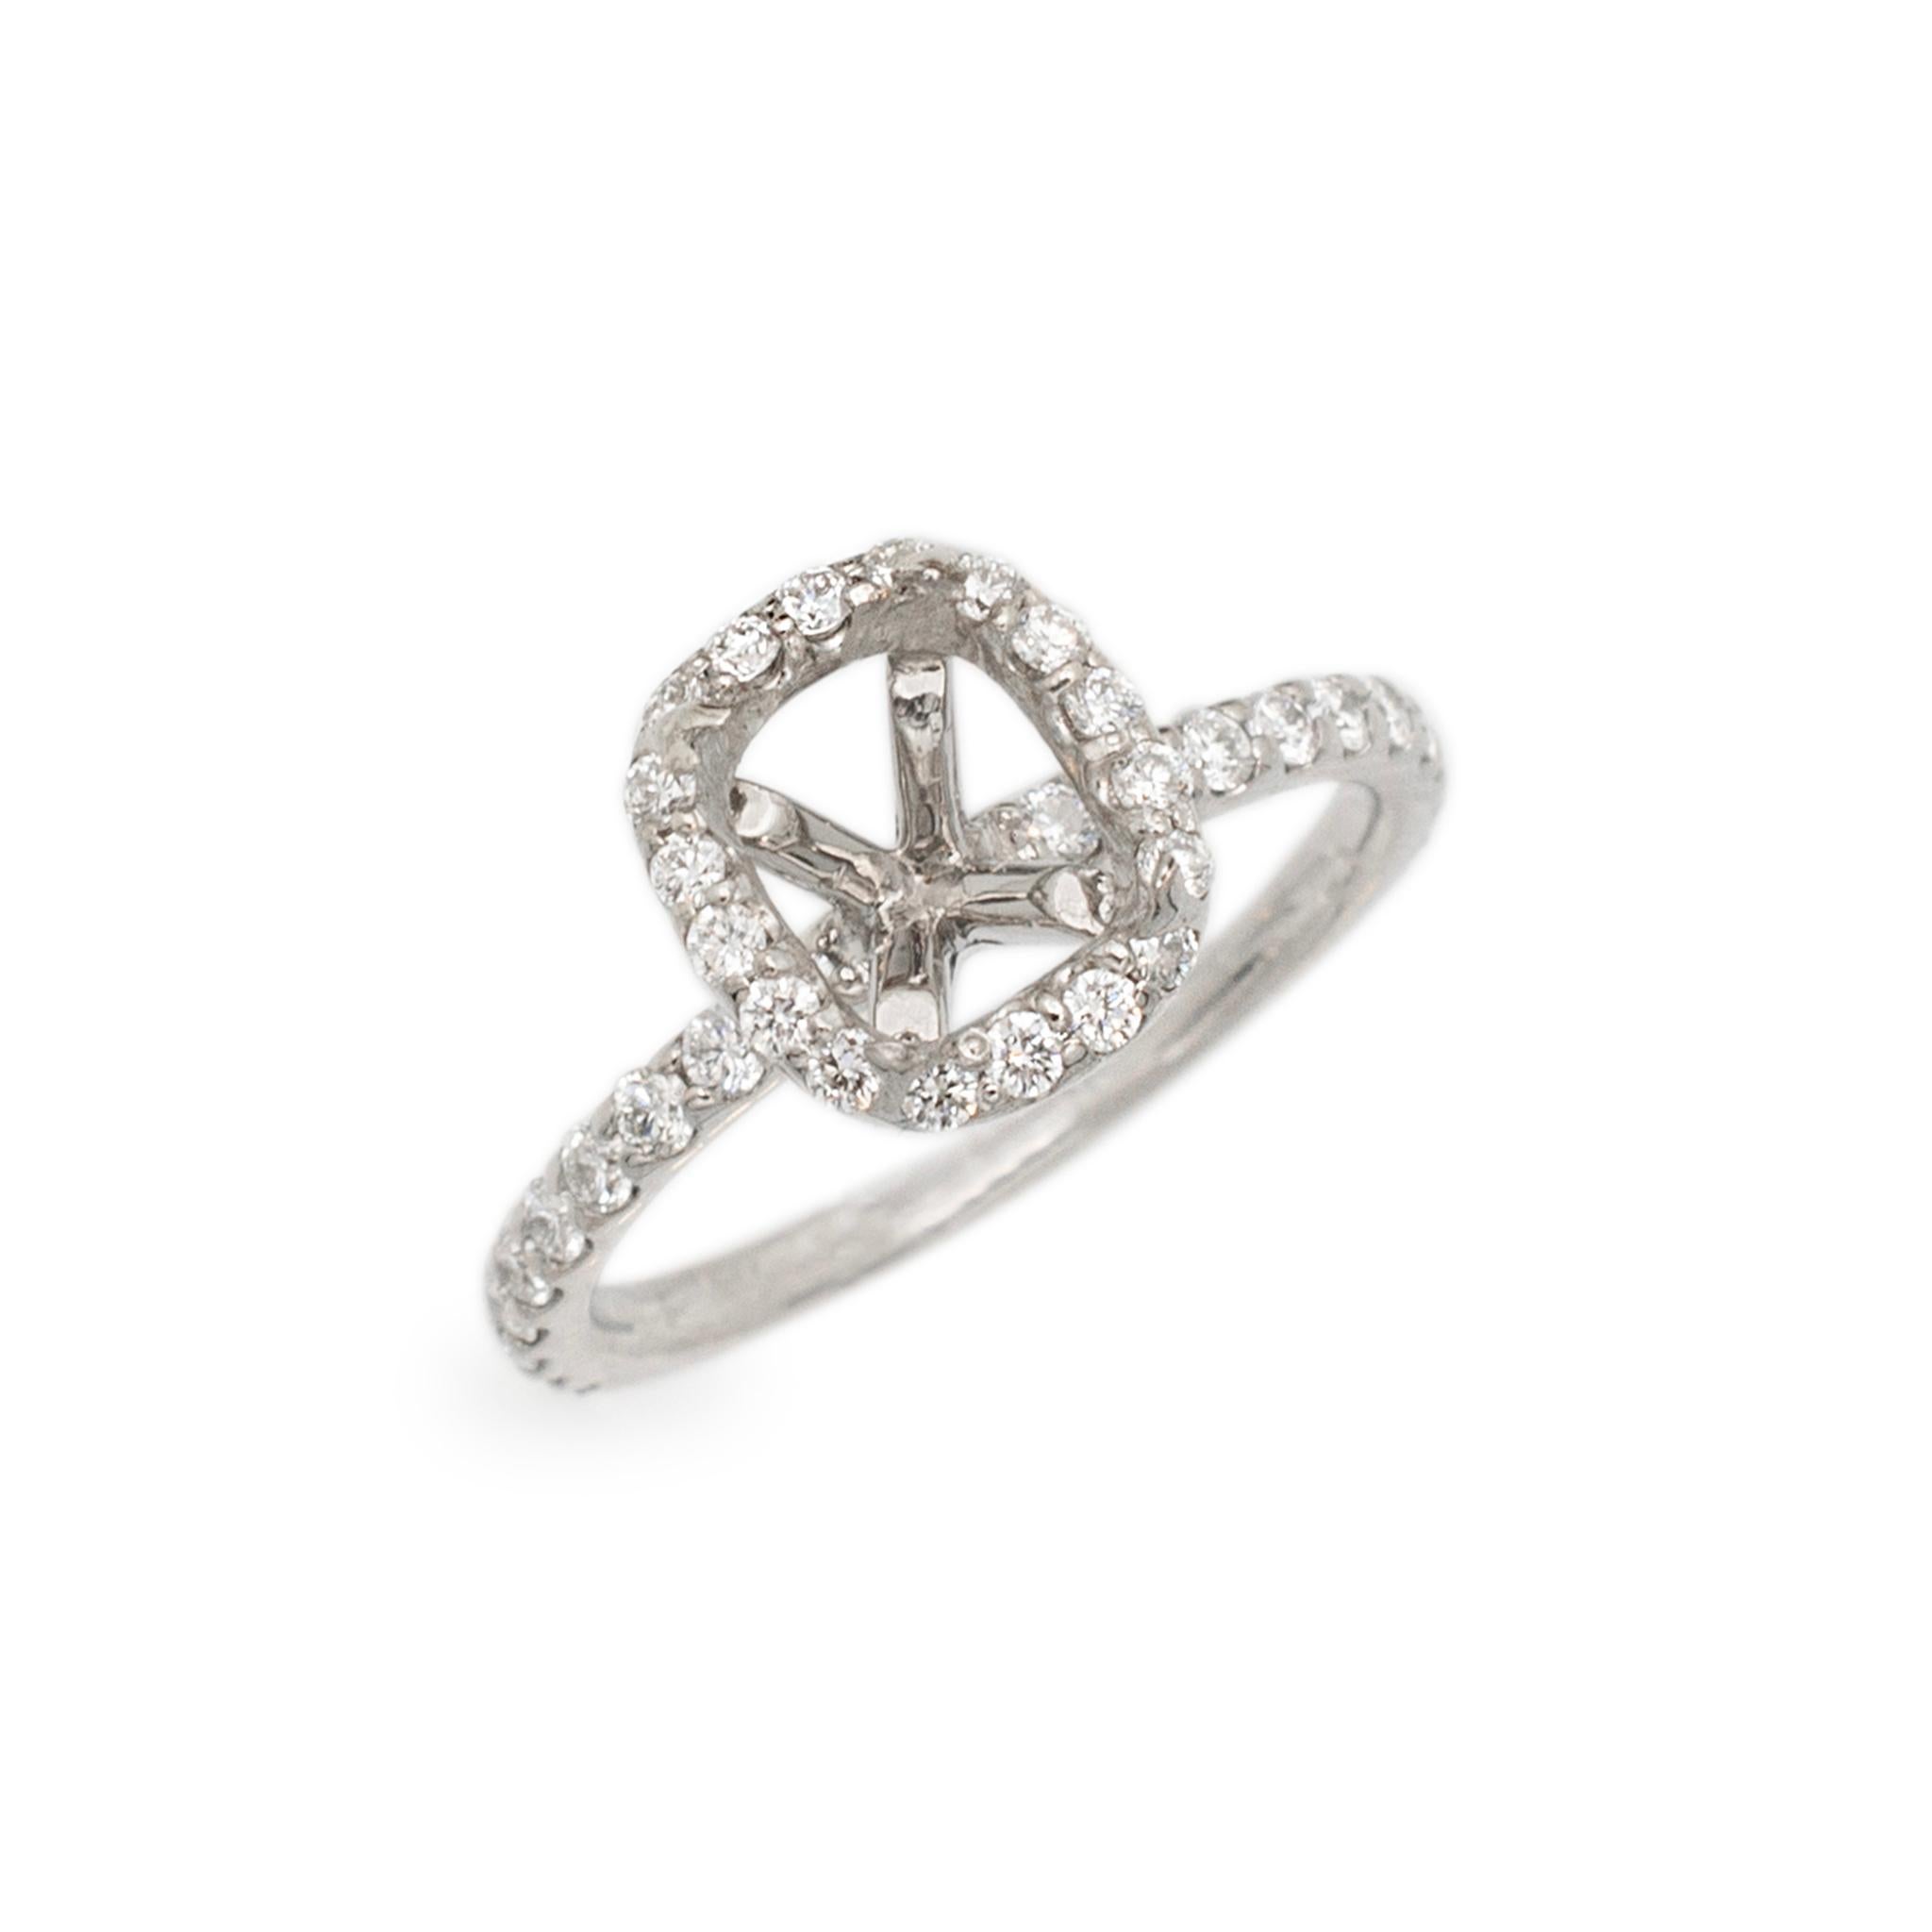 Gender: Ladies

Metal Type: 14K White Gold

Size: 5

Weight: 2.34 grams

Ladies 14K white gold diamond halo accented engagement semi-mount ring with a half round shank. The ring is a size 5. The ring weighs a total of 2.34 grams. Engraved with